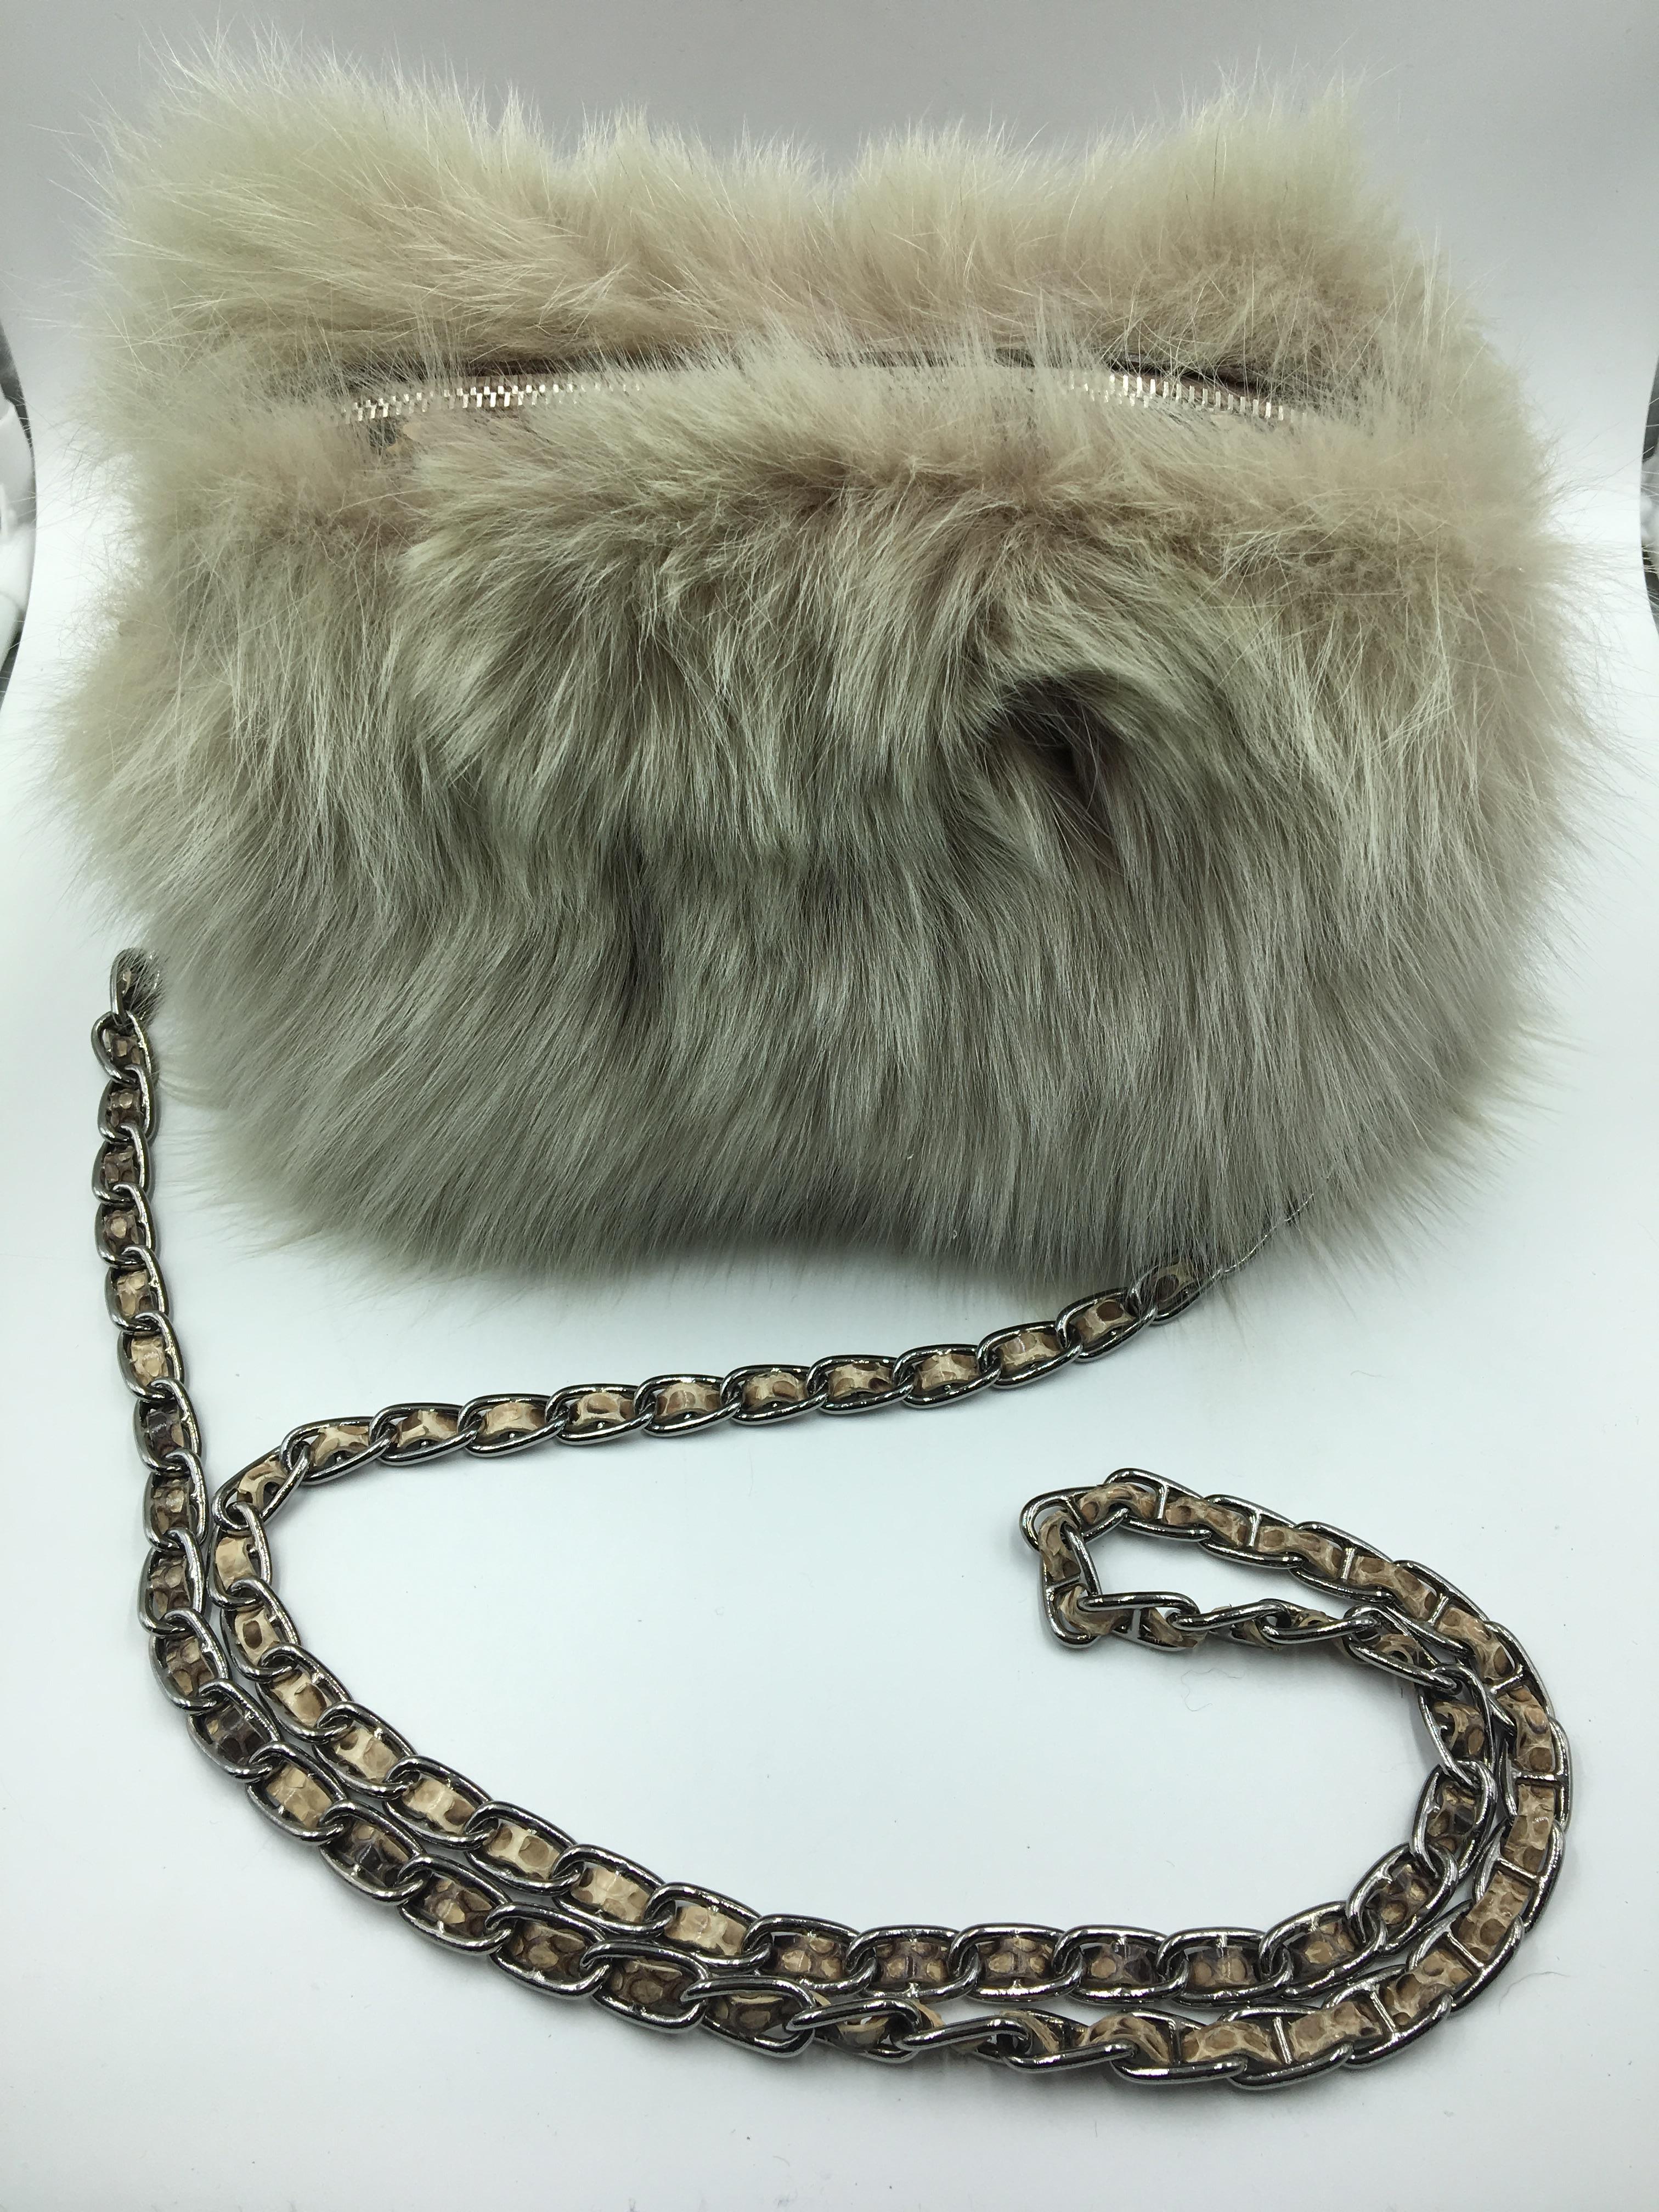 Soft Prada bag with a rounded shape, covered with beige fox fur on the front and back with rigid profiles made of shiny python leather in the same colour as the fur.
This Fox Fur Bag is characterized by metal accessories with palladium finishes,